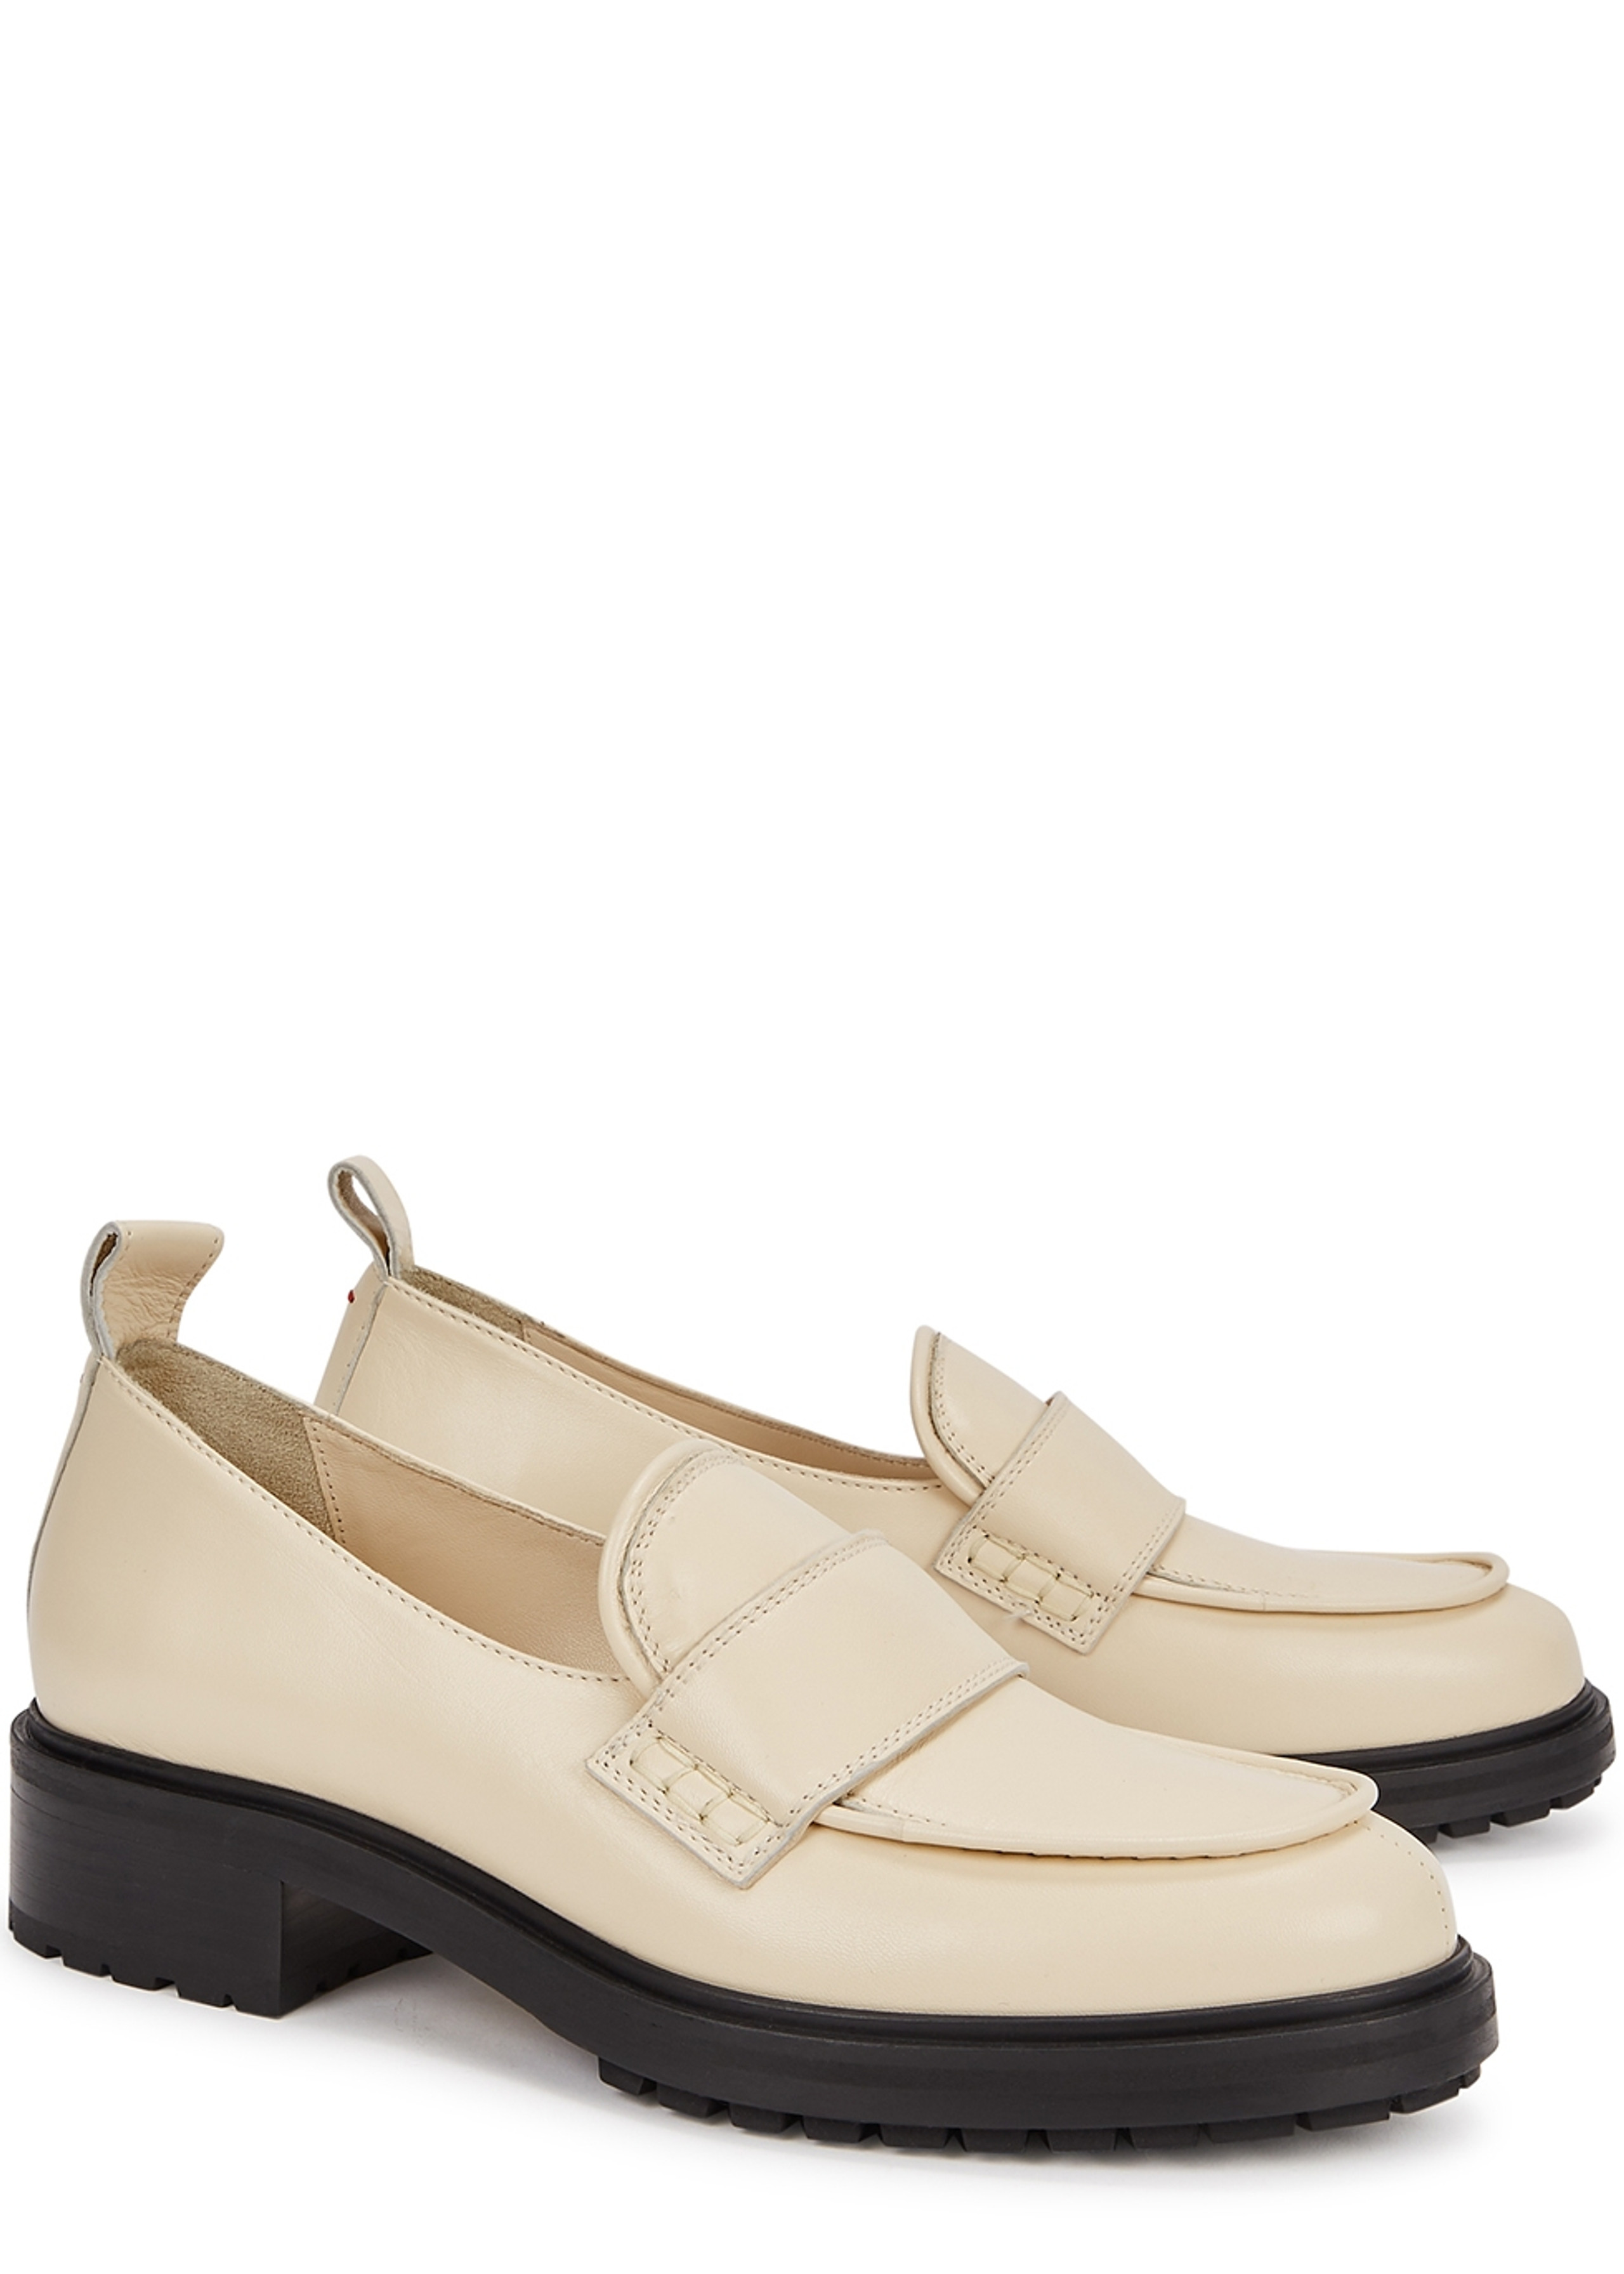 AEYDE Ruth 40 cream leather loafers | Harvey Nichols